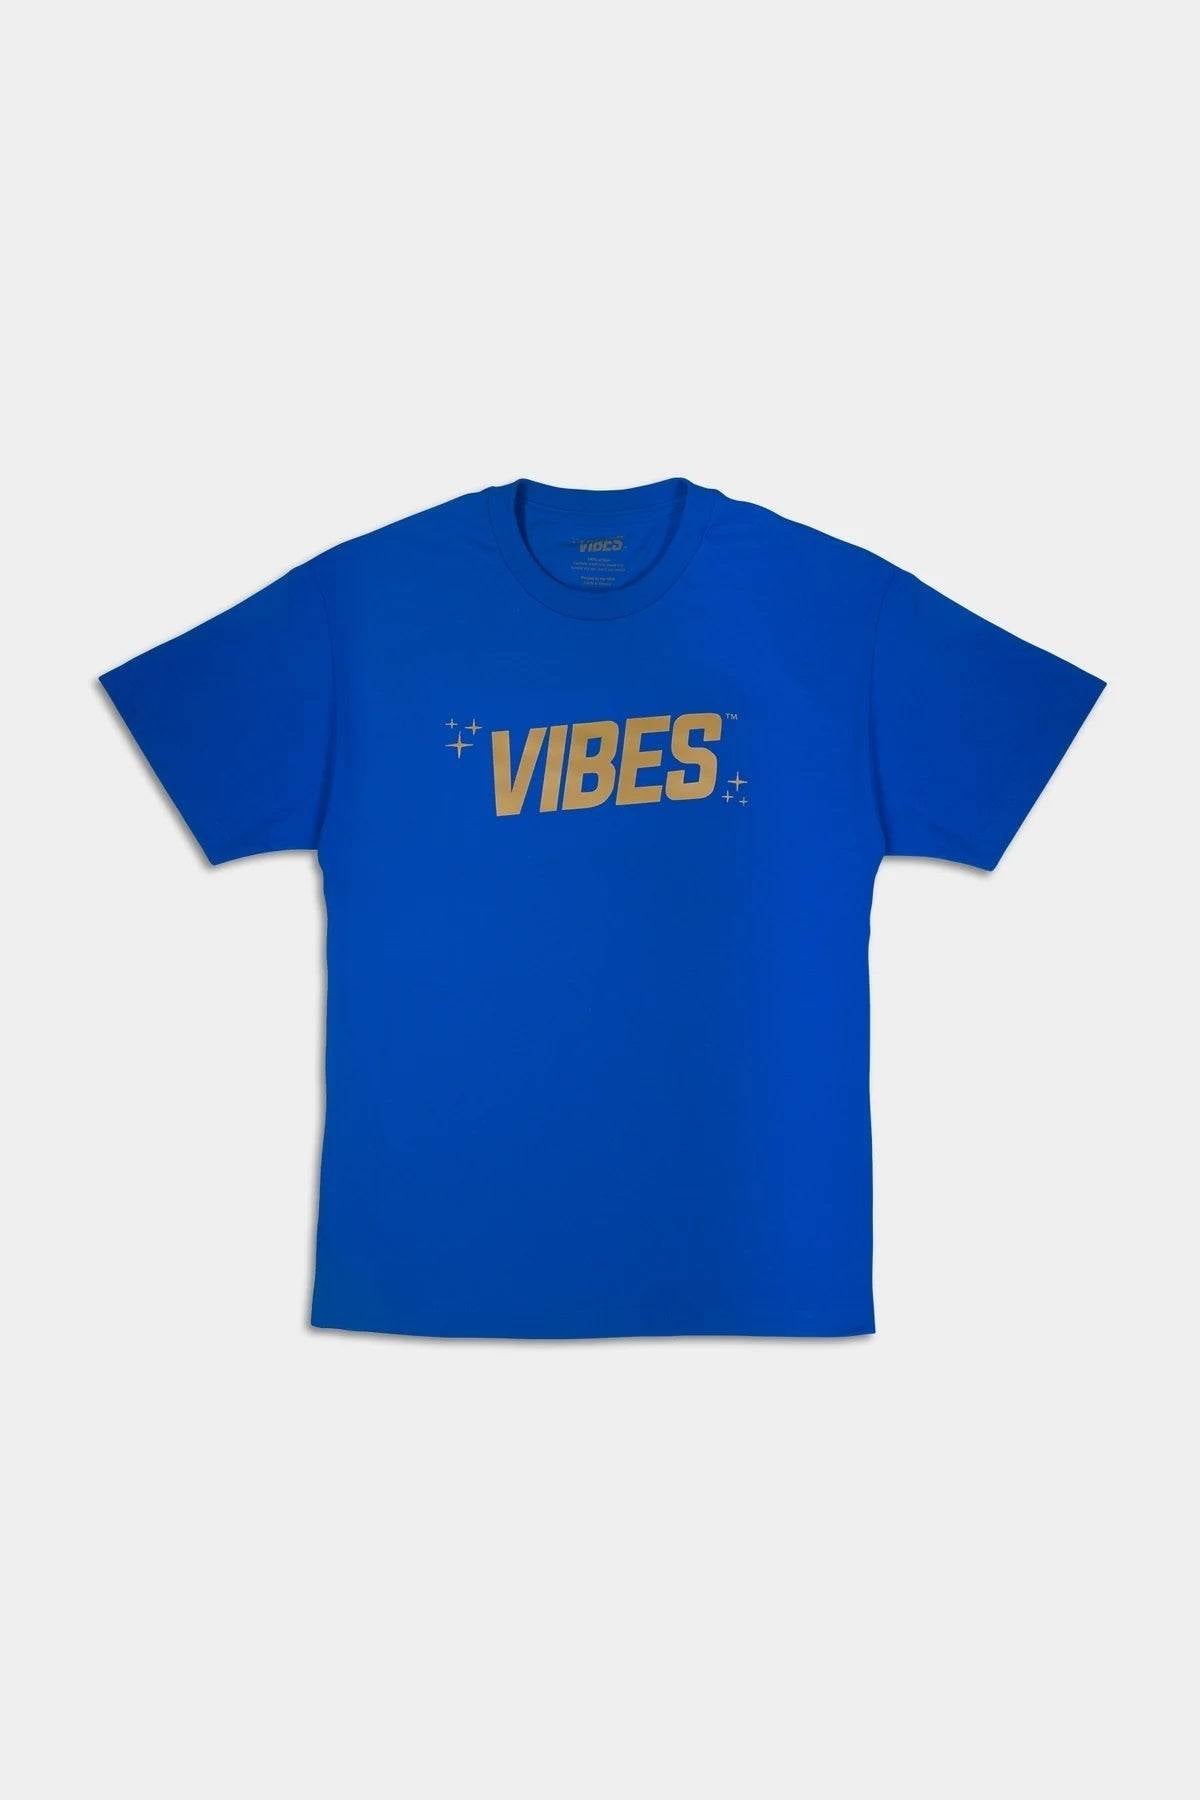 VIBES Blue With Gold Logo T-Shirt X-Large